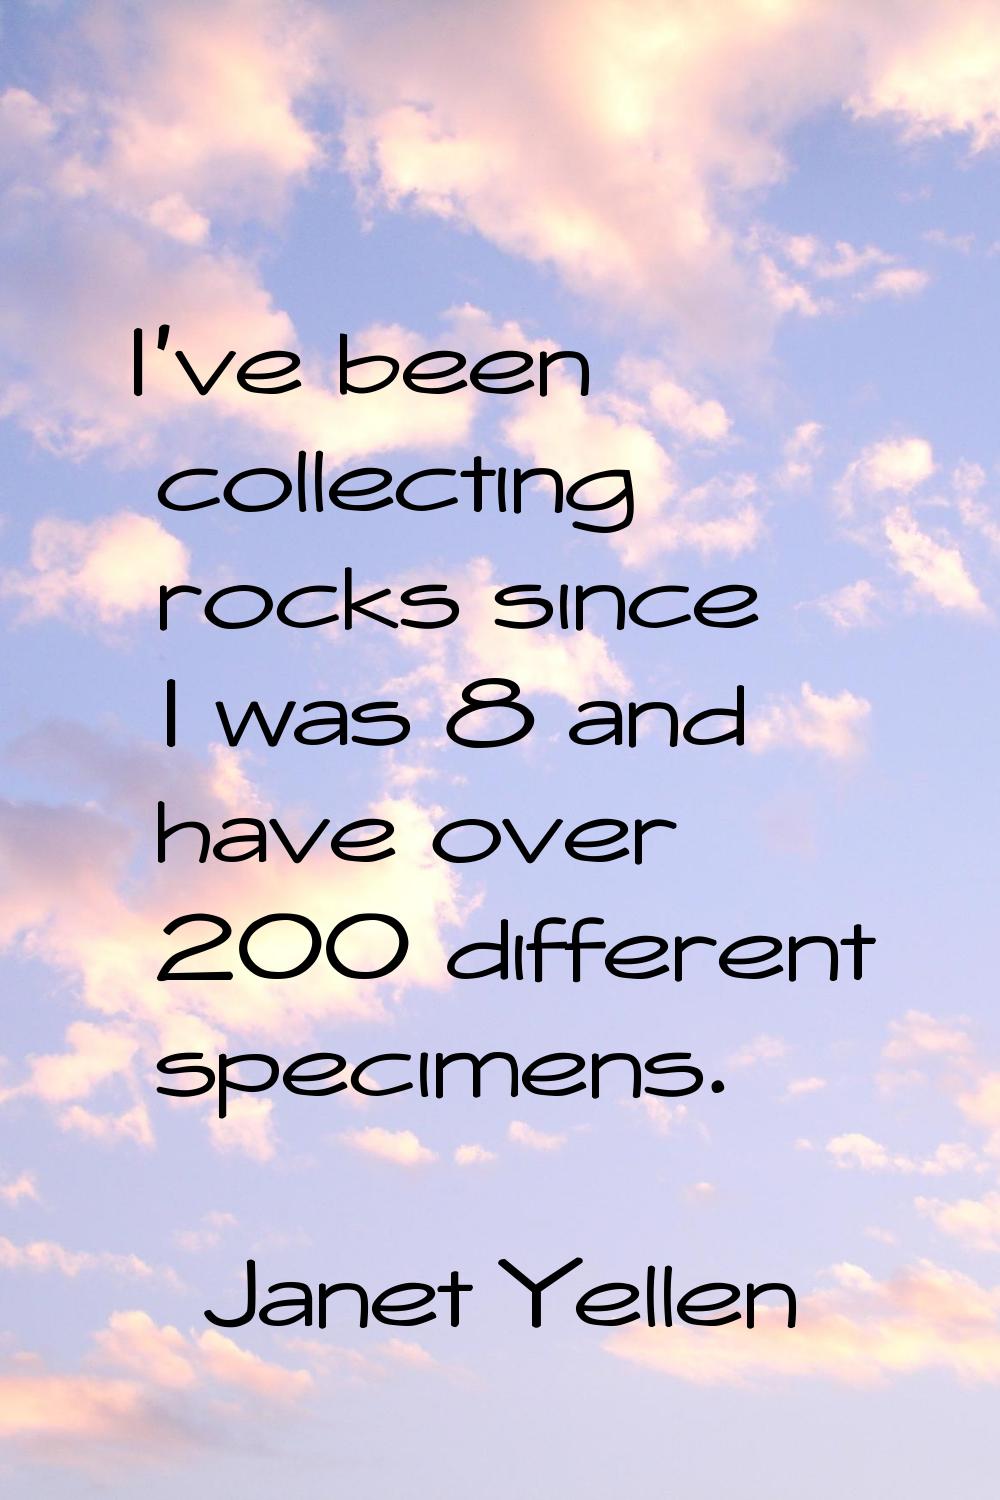 I've been collecting rocks since I was 8 and have over 200 different specimens.